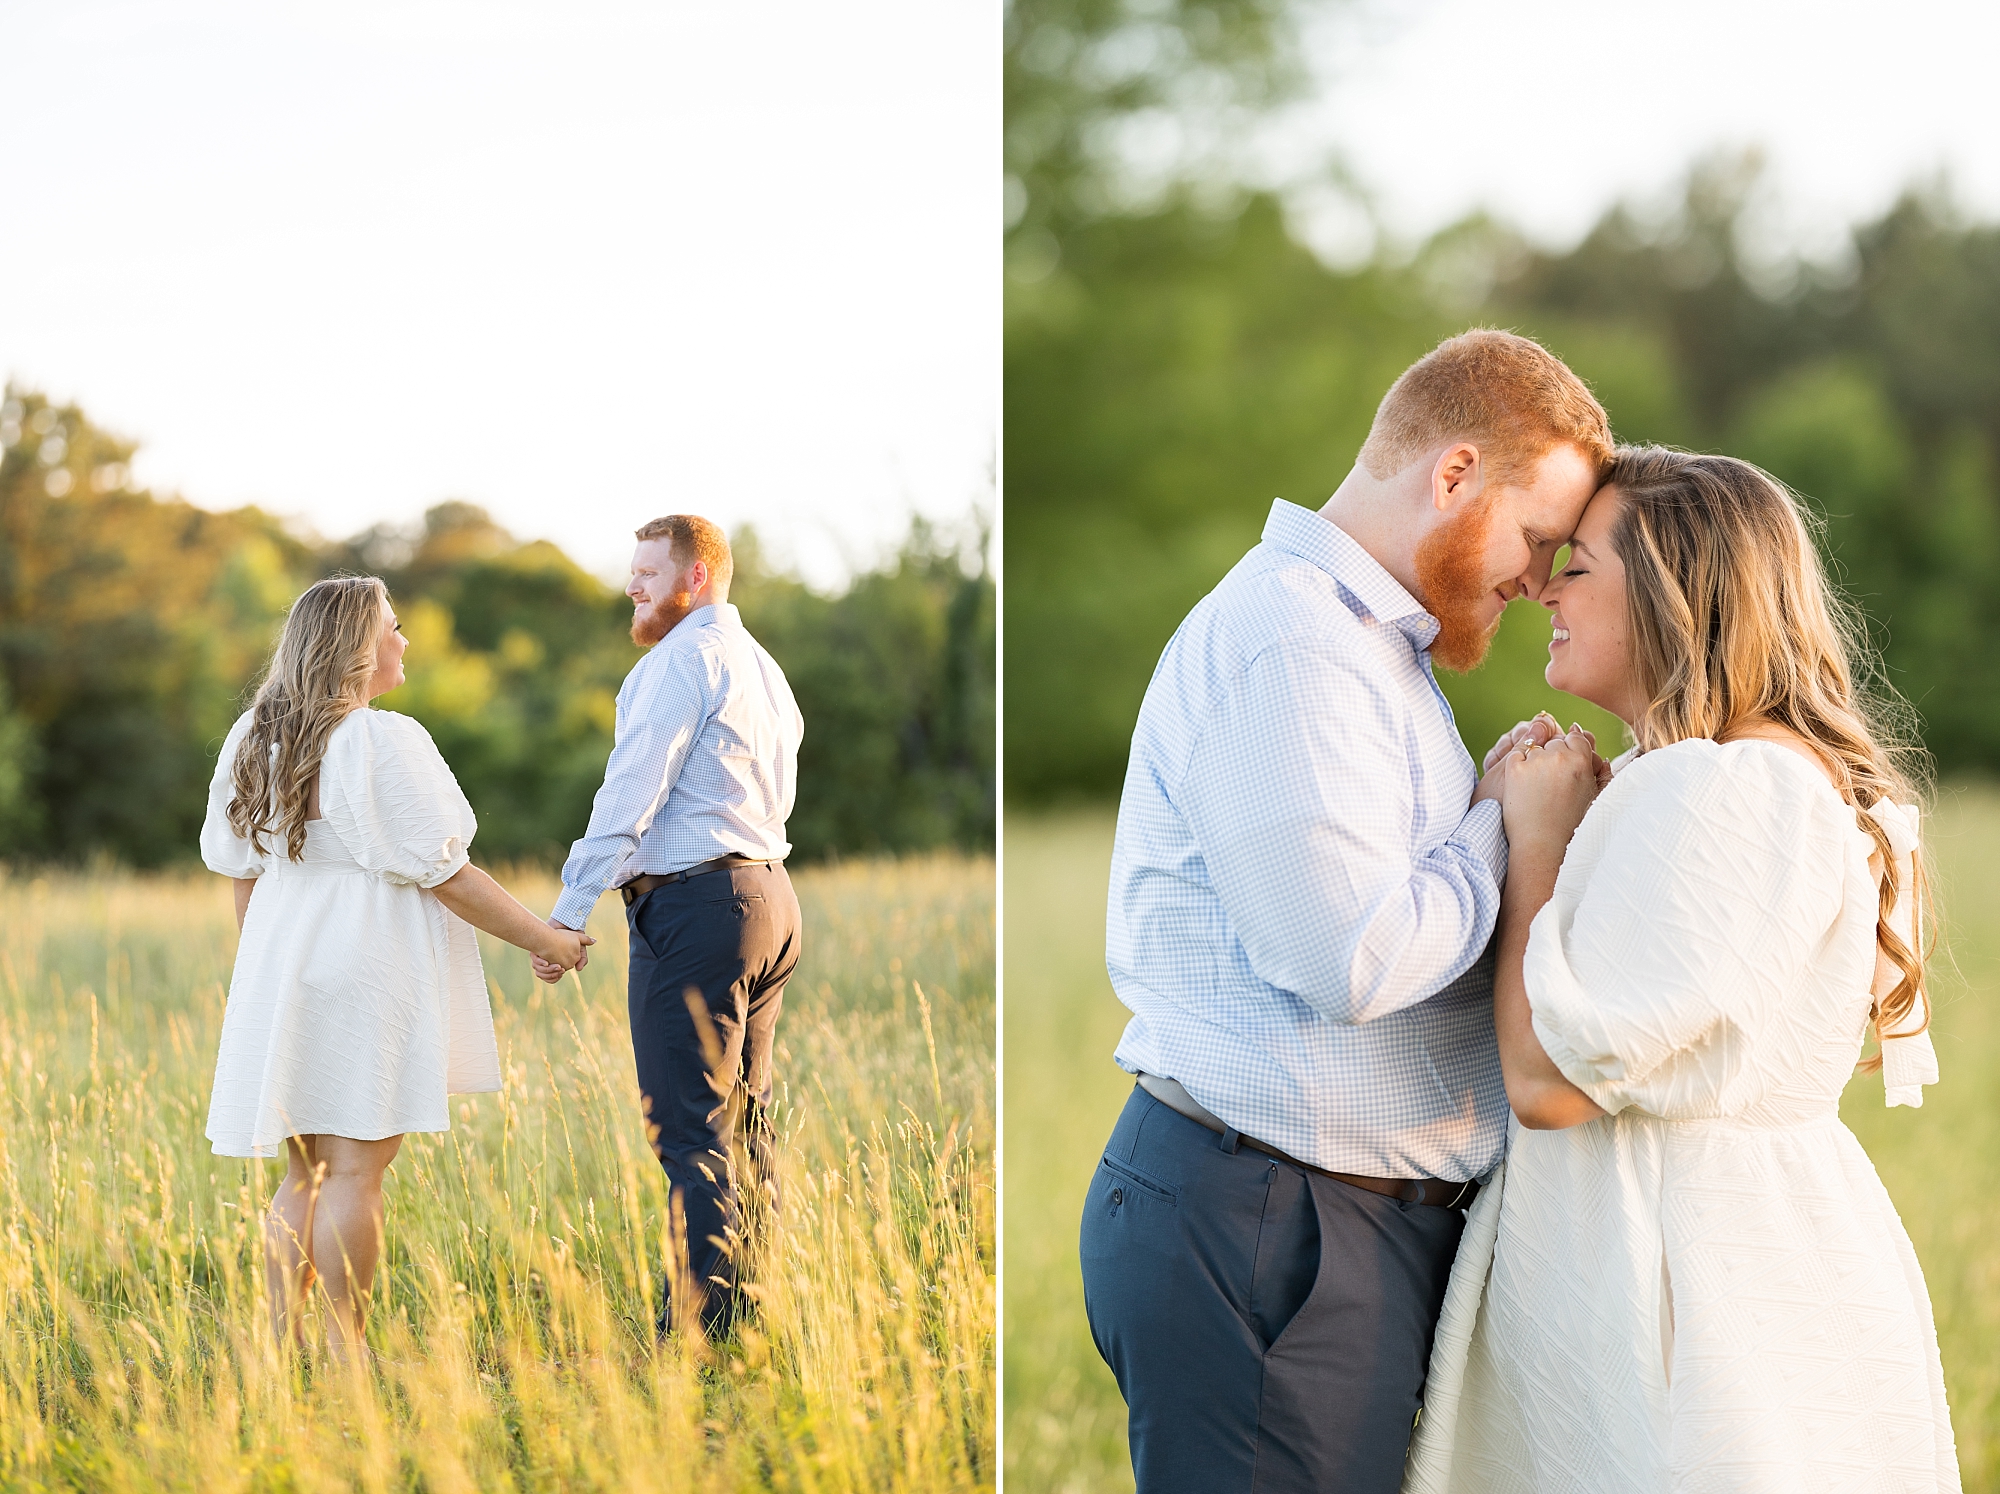 NC Museum of Art Park engagement session in the spring | Raleigh NC Engagement Photographer